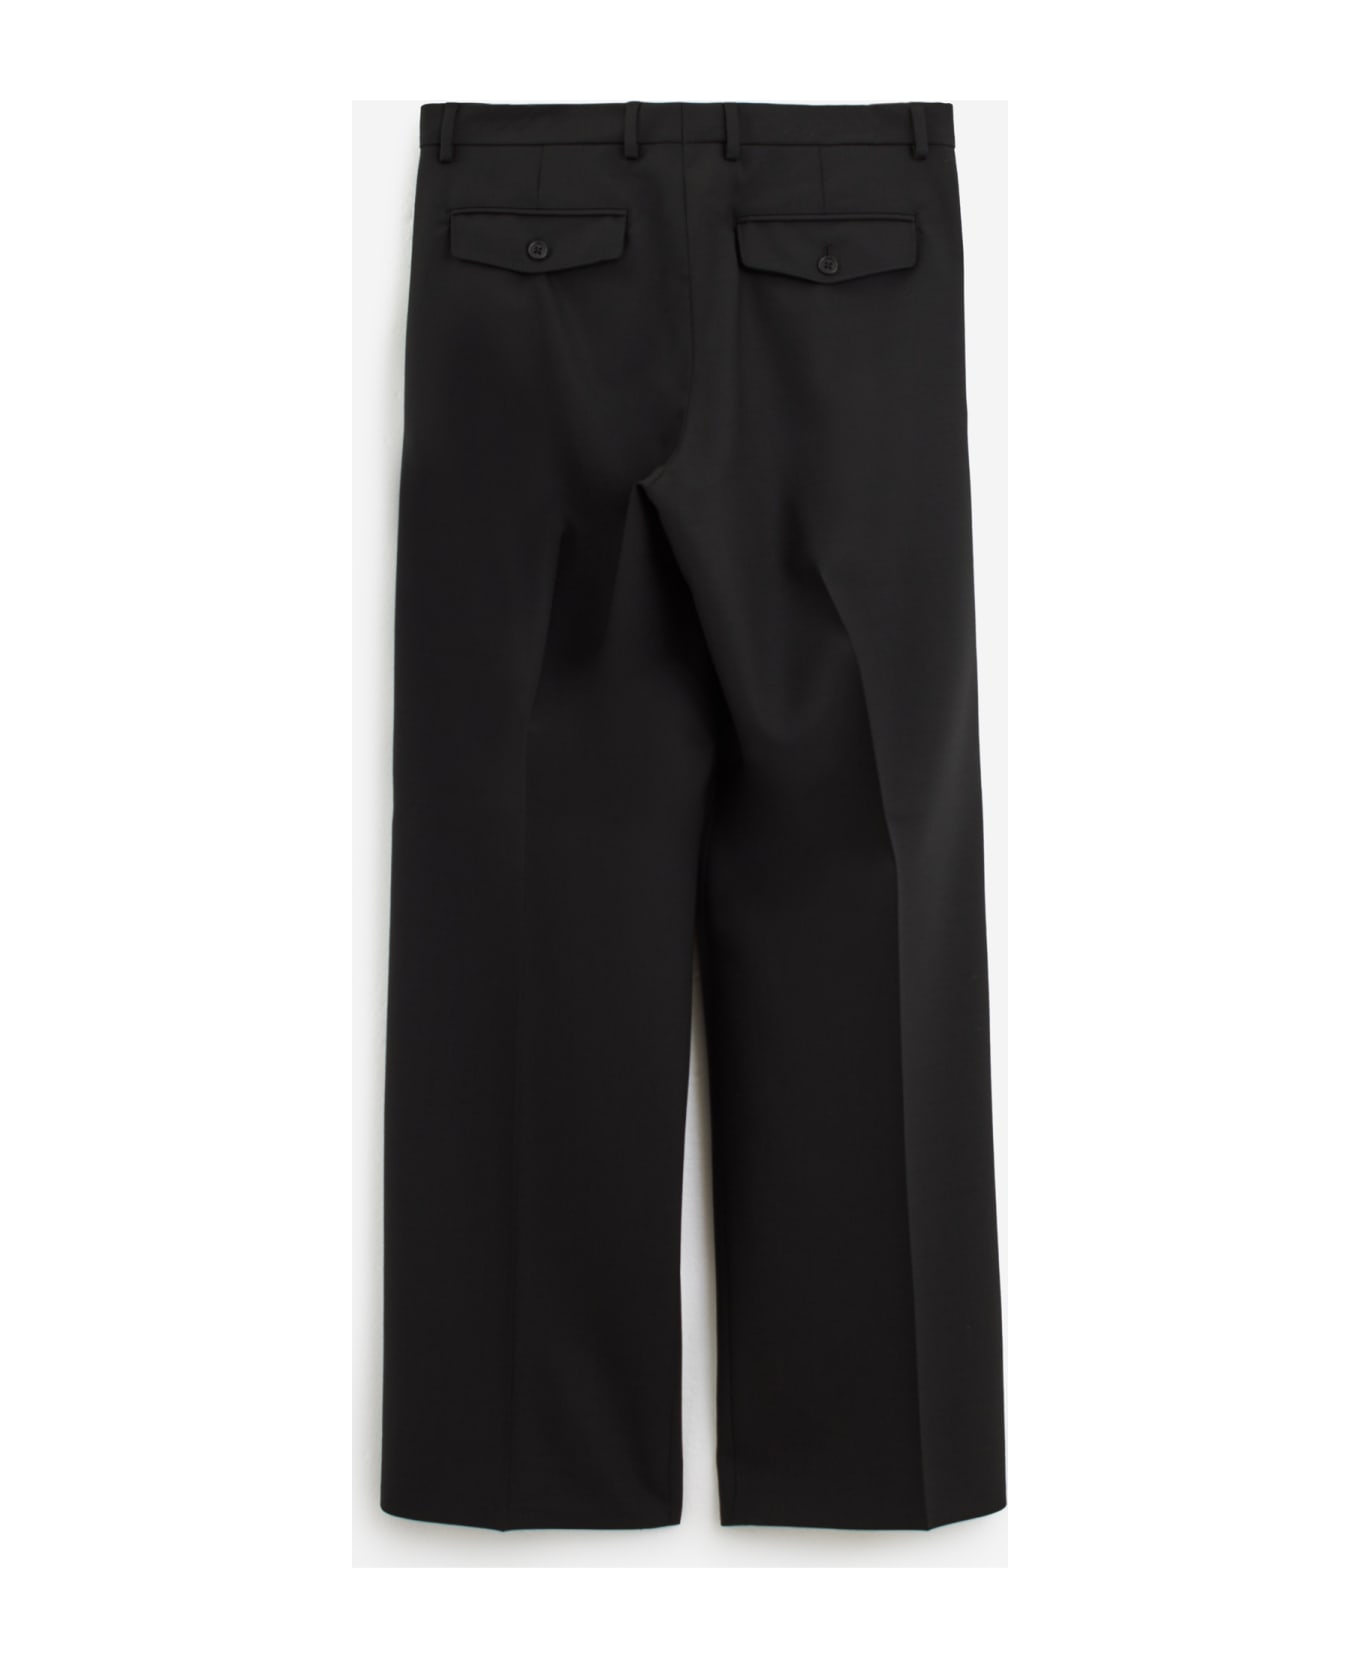 Sunflower Wide Pleated Pants - black ボトムス